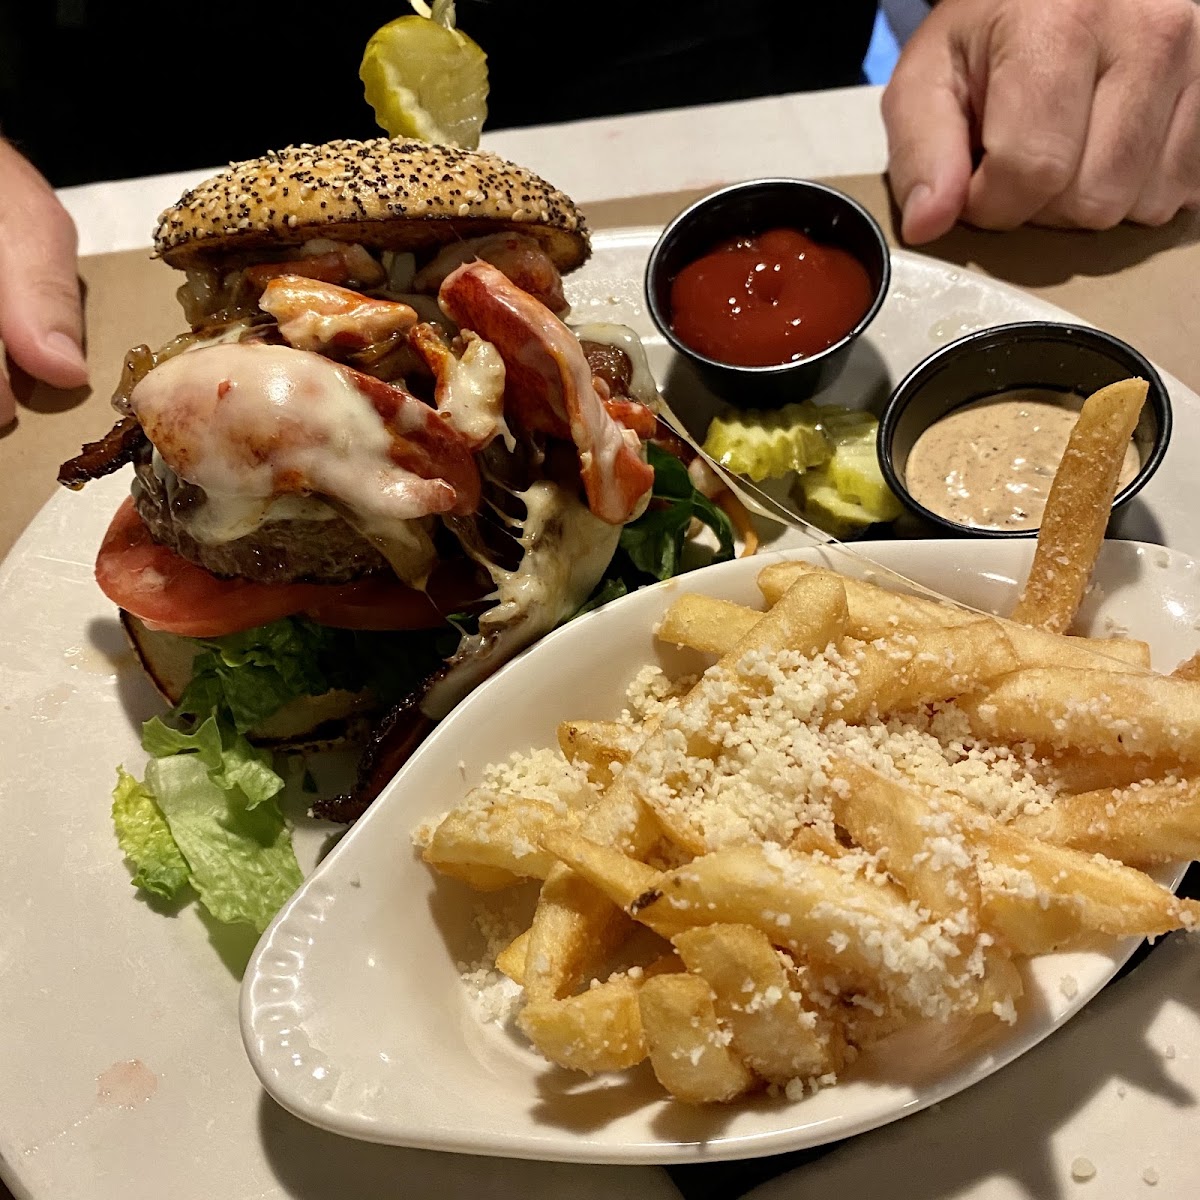 Lobster burger and fries!